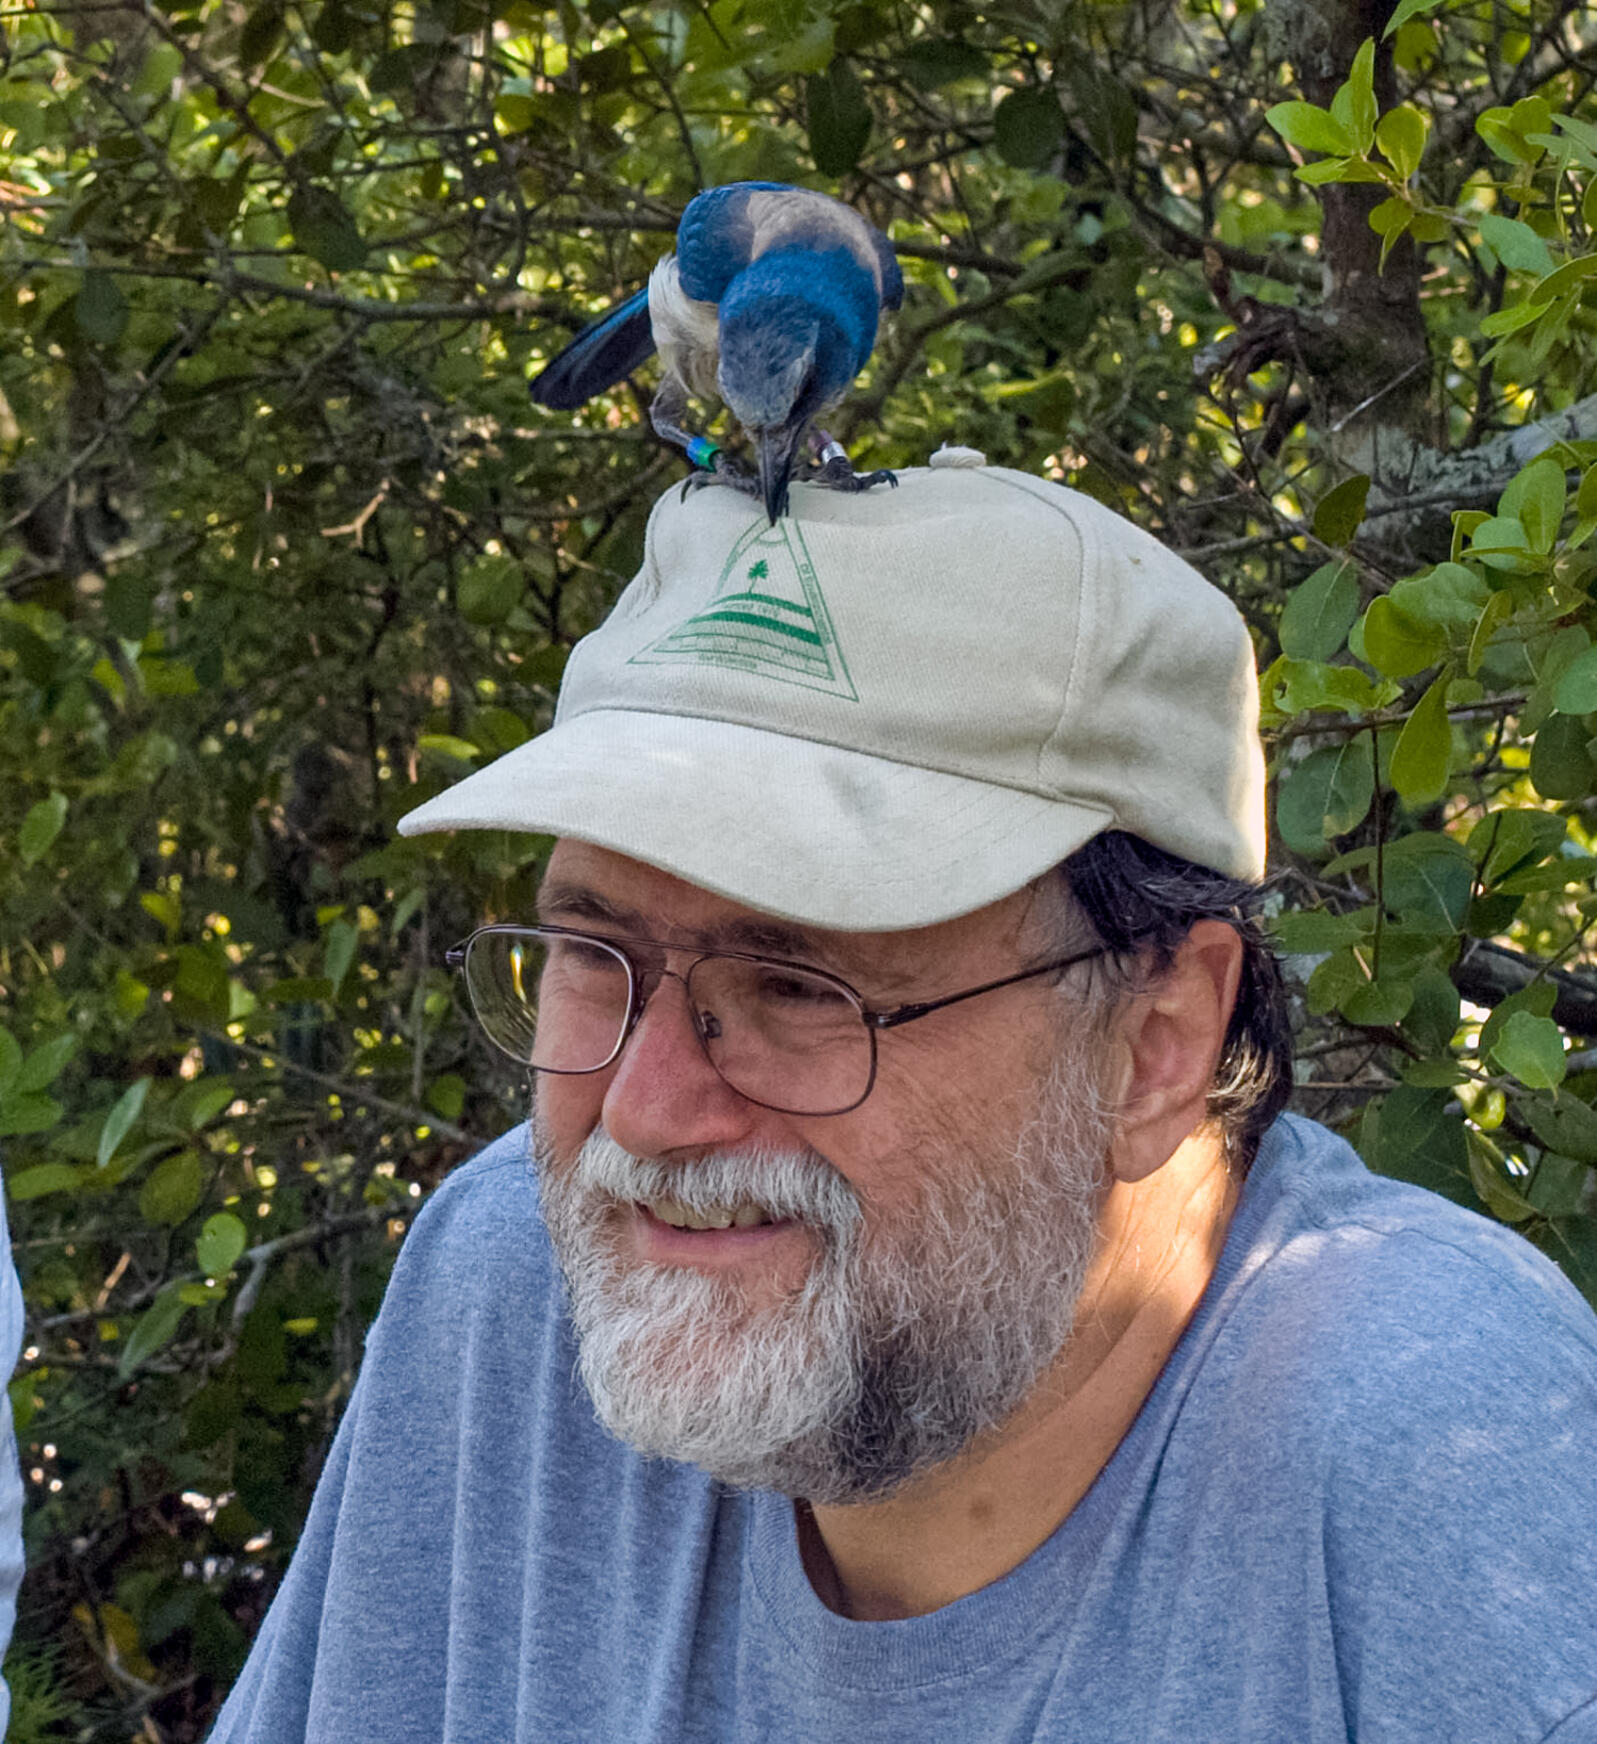 A headshot of Stephen Kintner, with a Florida Scrub-Jay standing on his hat.